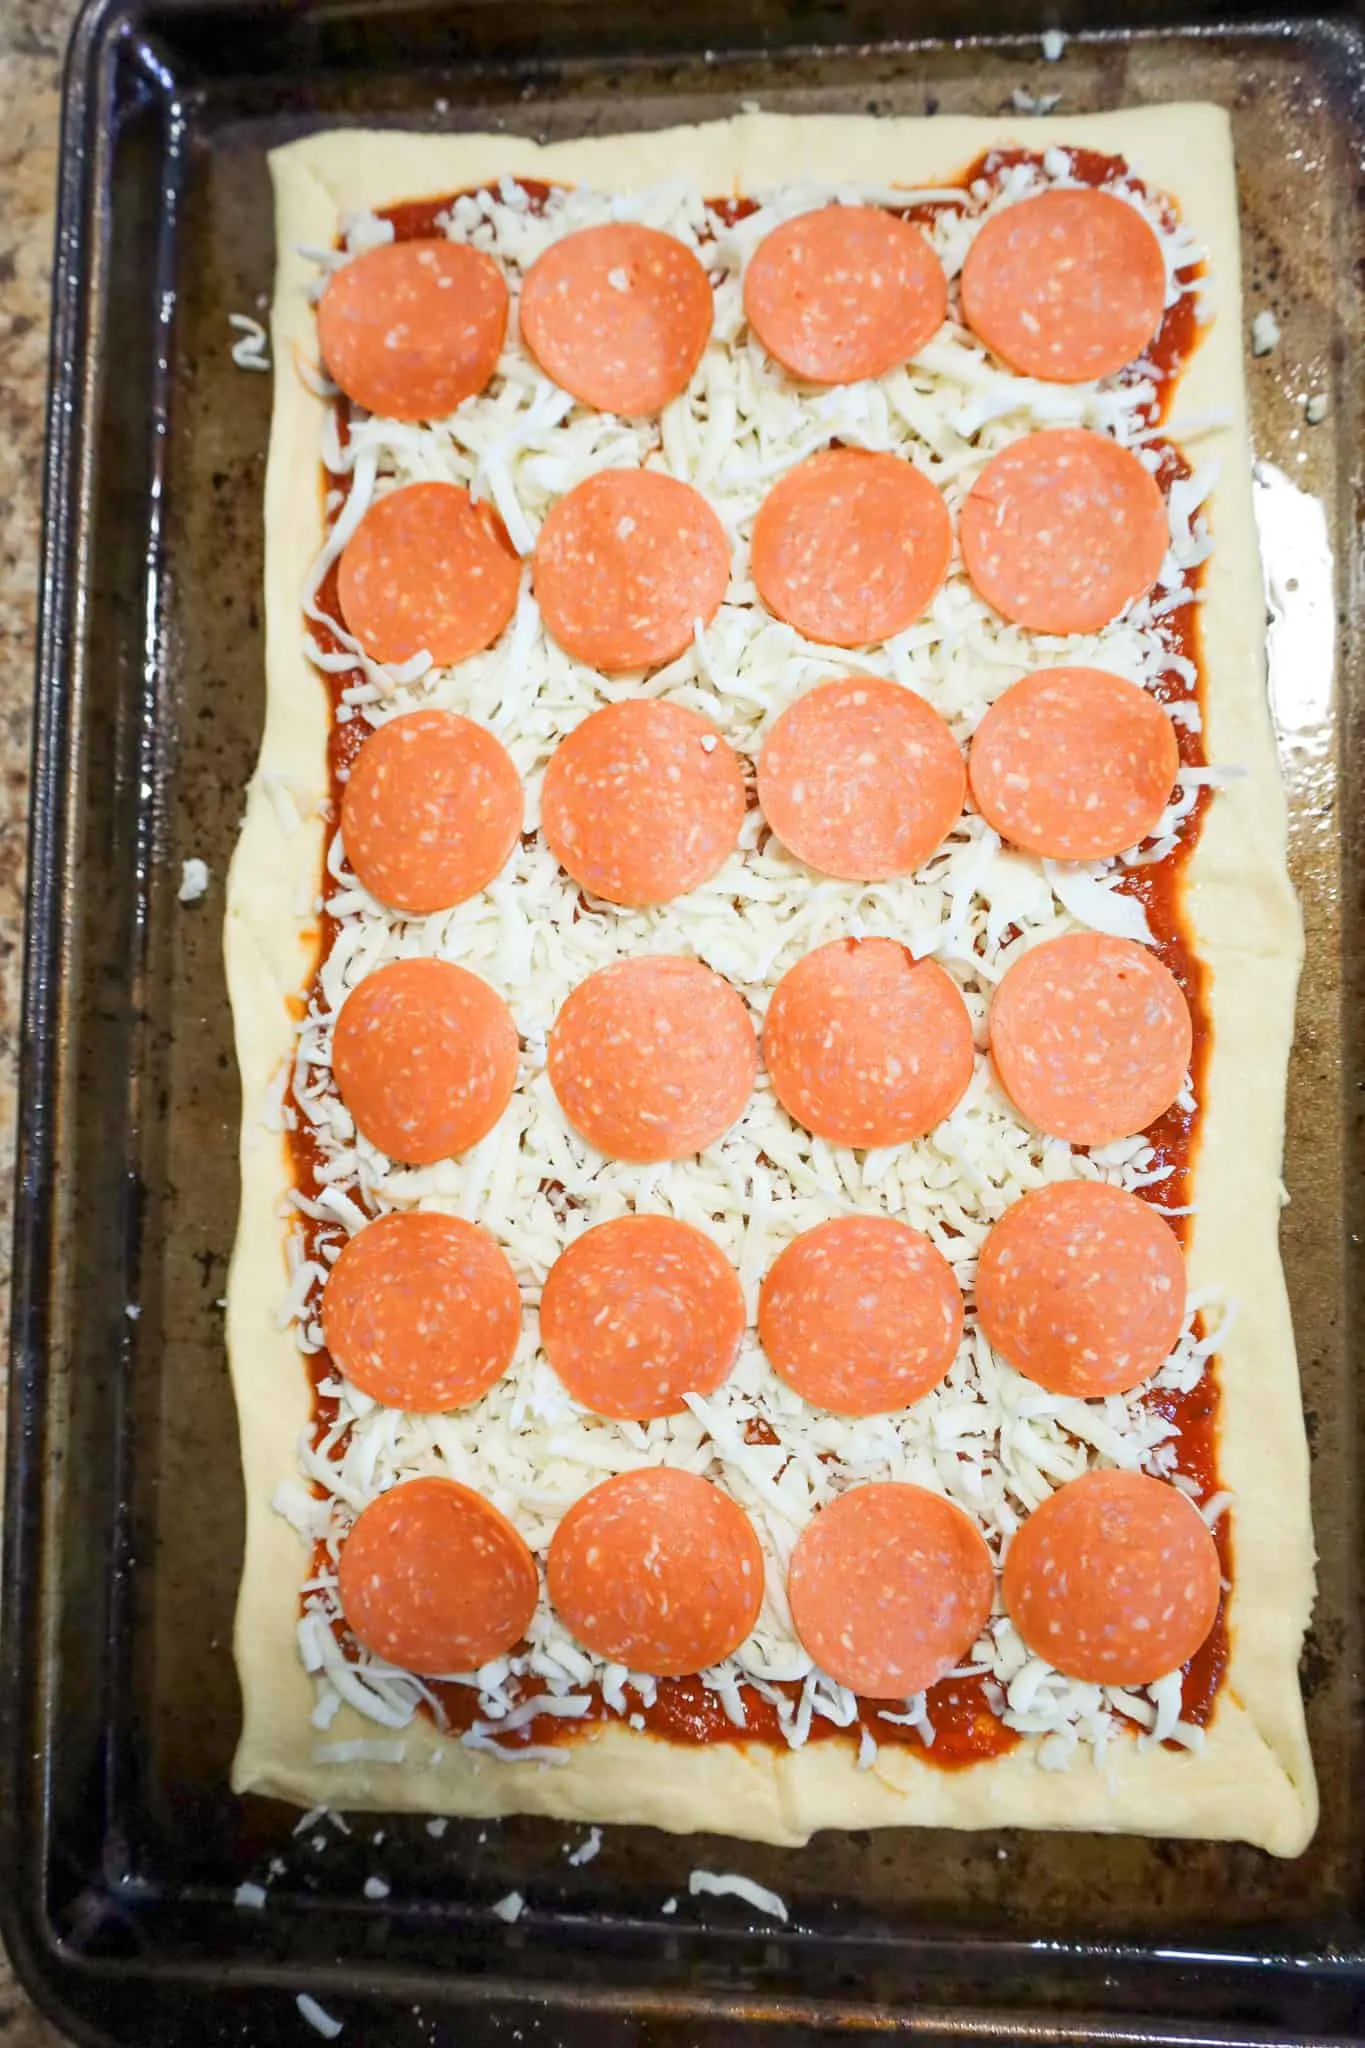 pepperoni slices and shredded cheese on top of sheet of pillsbury crescent dough